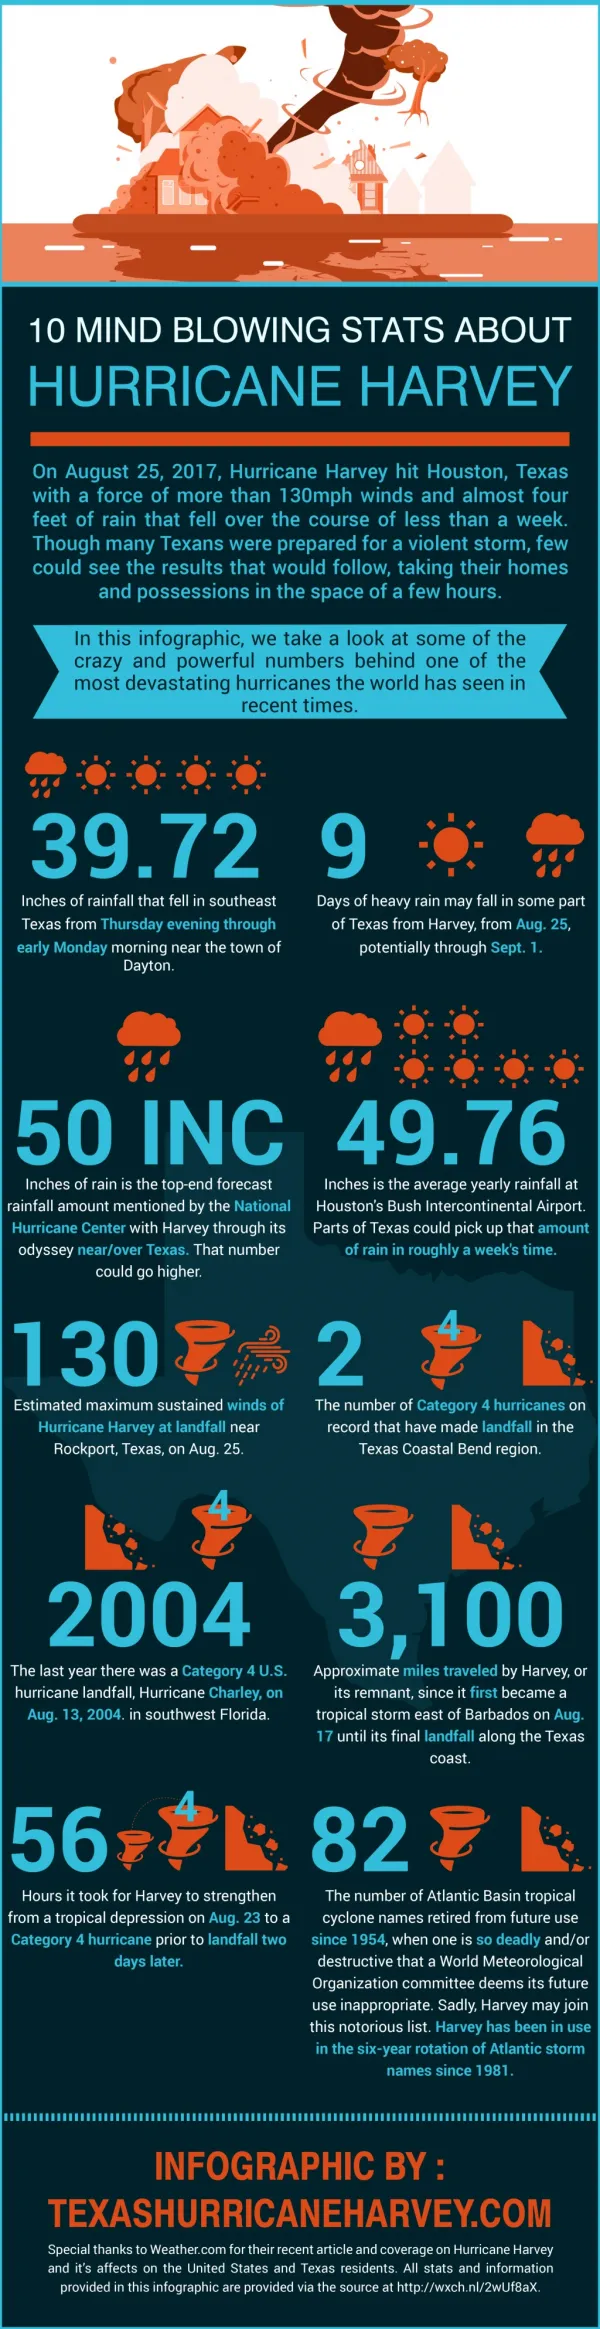 10 Mind Blowing Stats from Hurricane Harvey